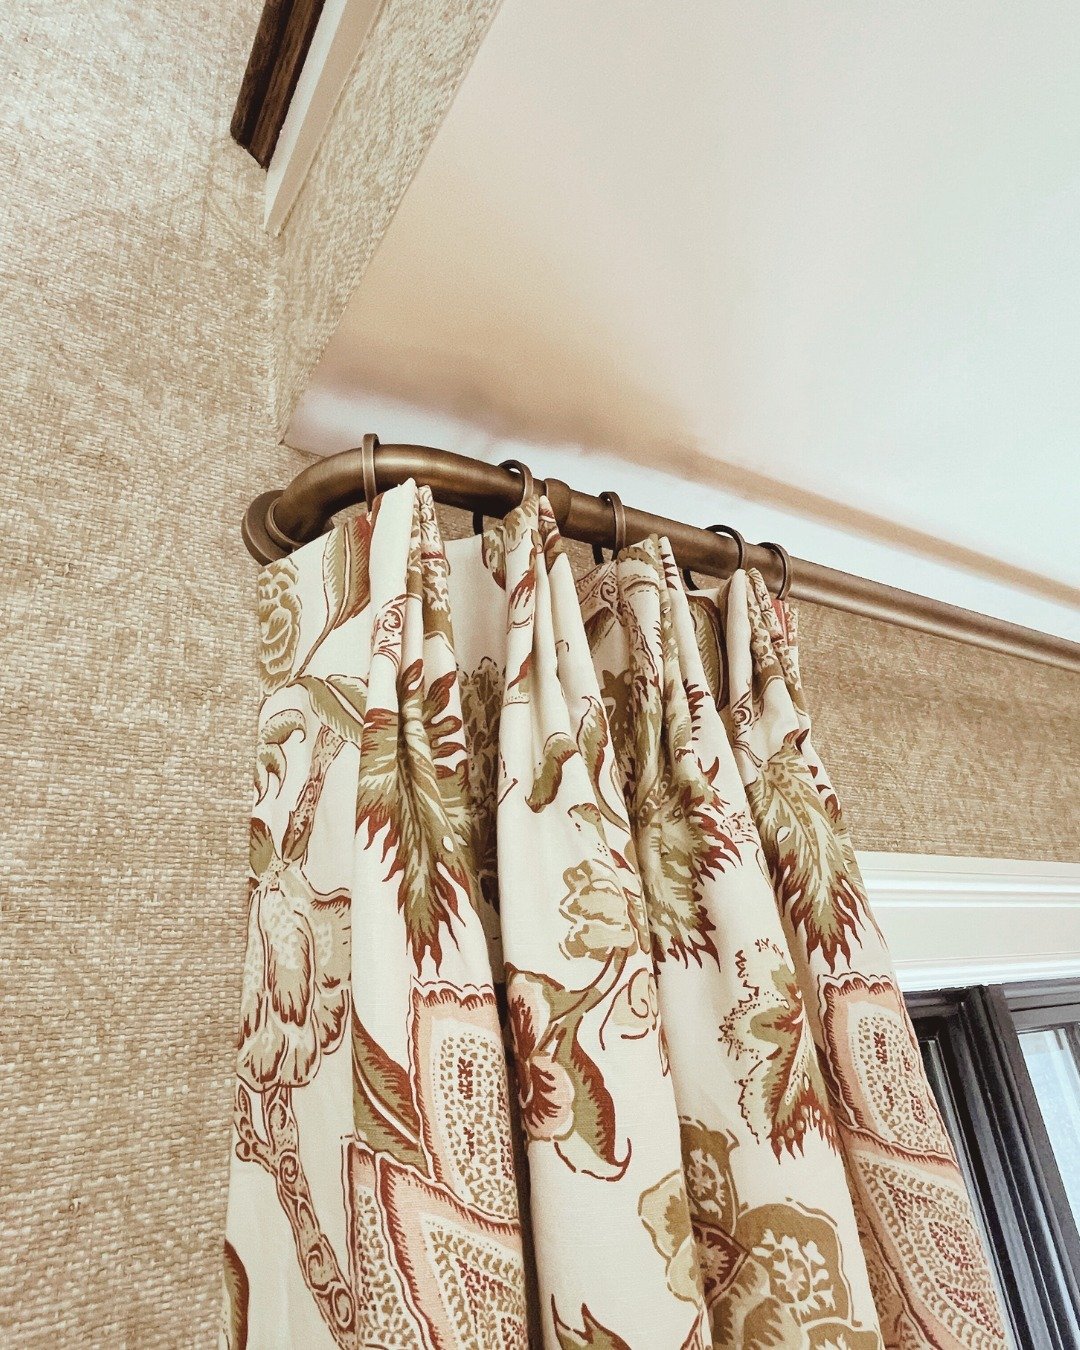 All the design elements are pieced together perfectly in this European-influenced foyer, bolstered by elegant, French return-mounted stationary panels with a dash of decorative trim.

It&rsquo;s no wonder since they were crafted by our highly skilled